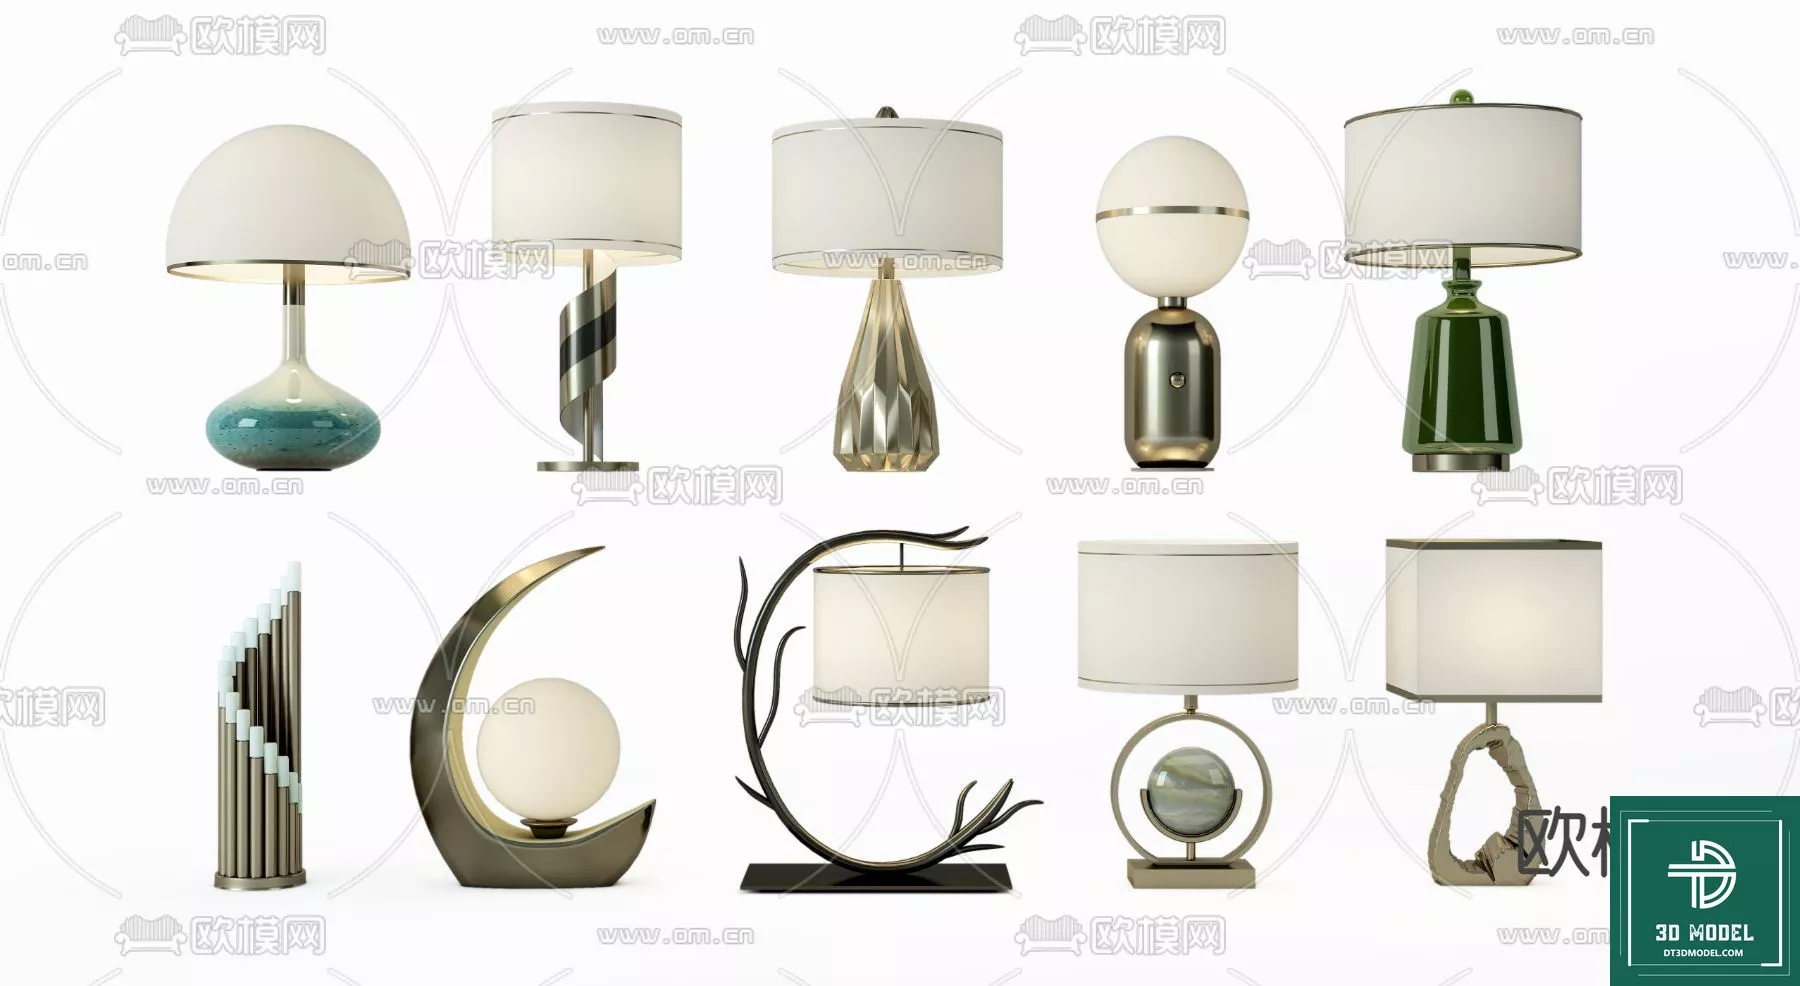 MODERN TABLE LAMP - SKETCHUP 3D MODEL - VRAY OR ENSCAPE - ID14507